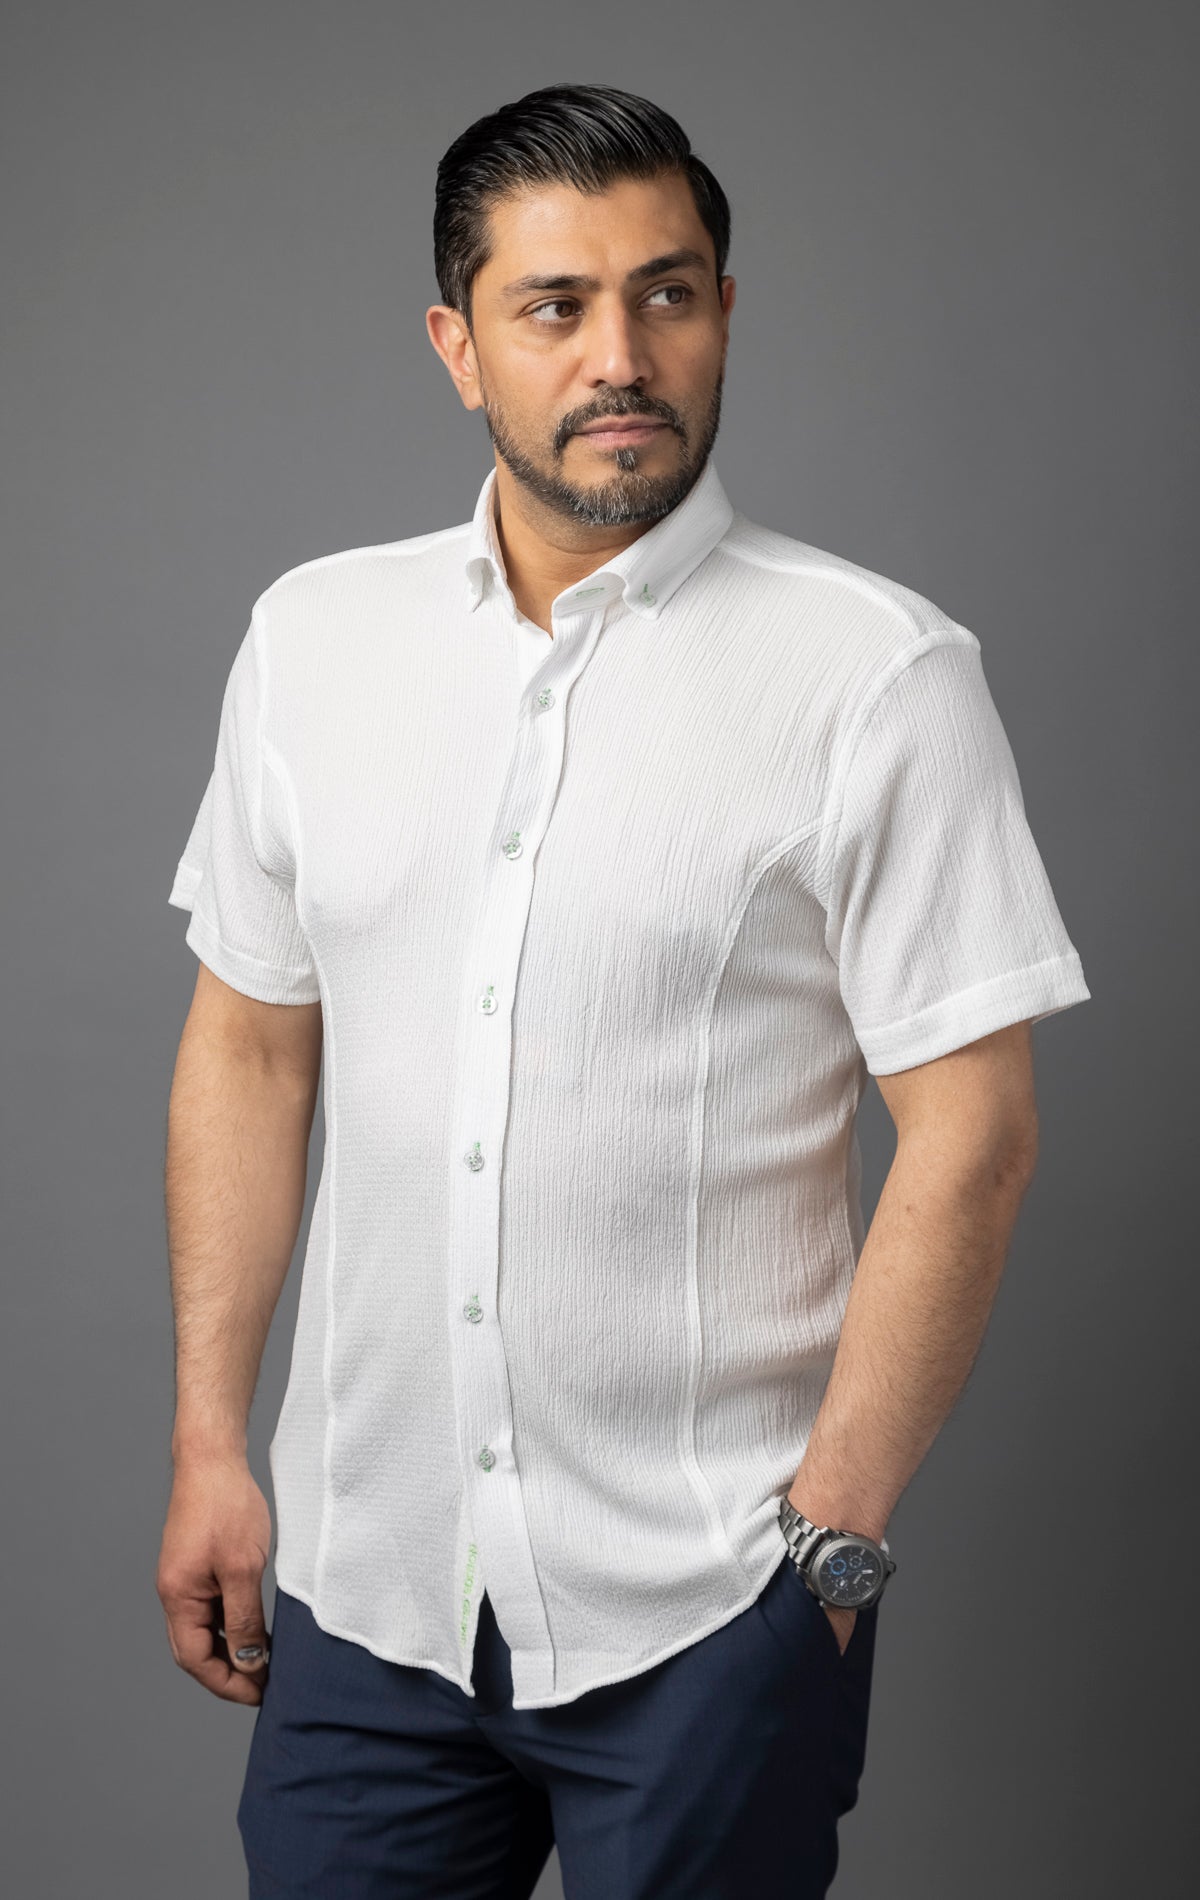 Casual button-up short sleeve shirt. Relaxed fit.